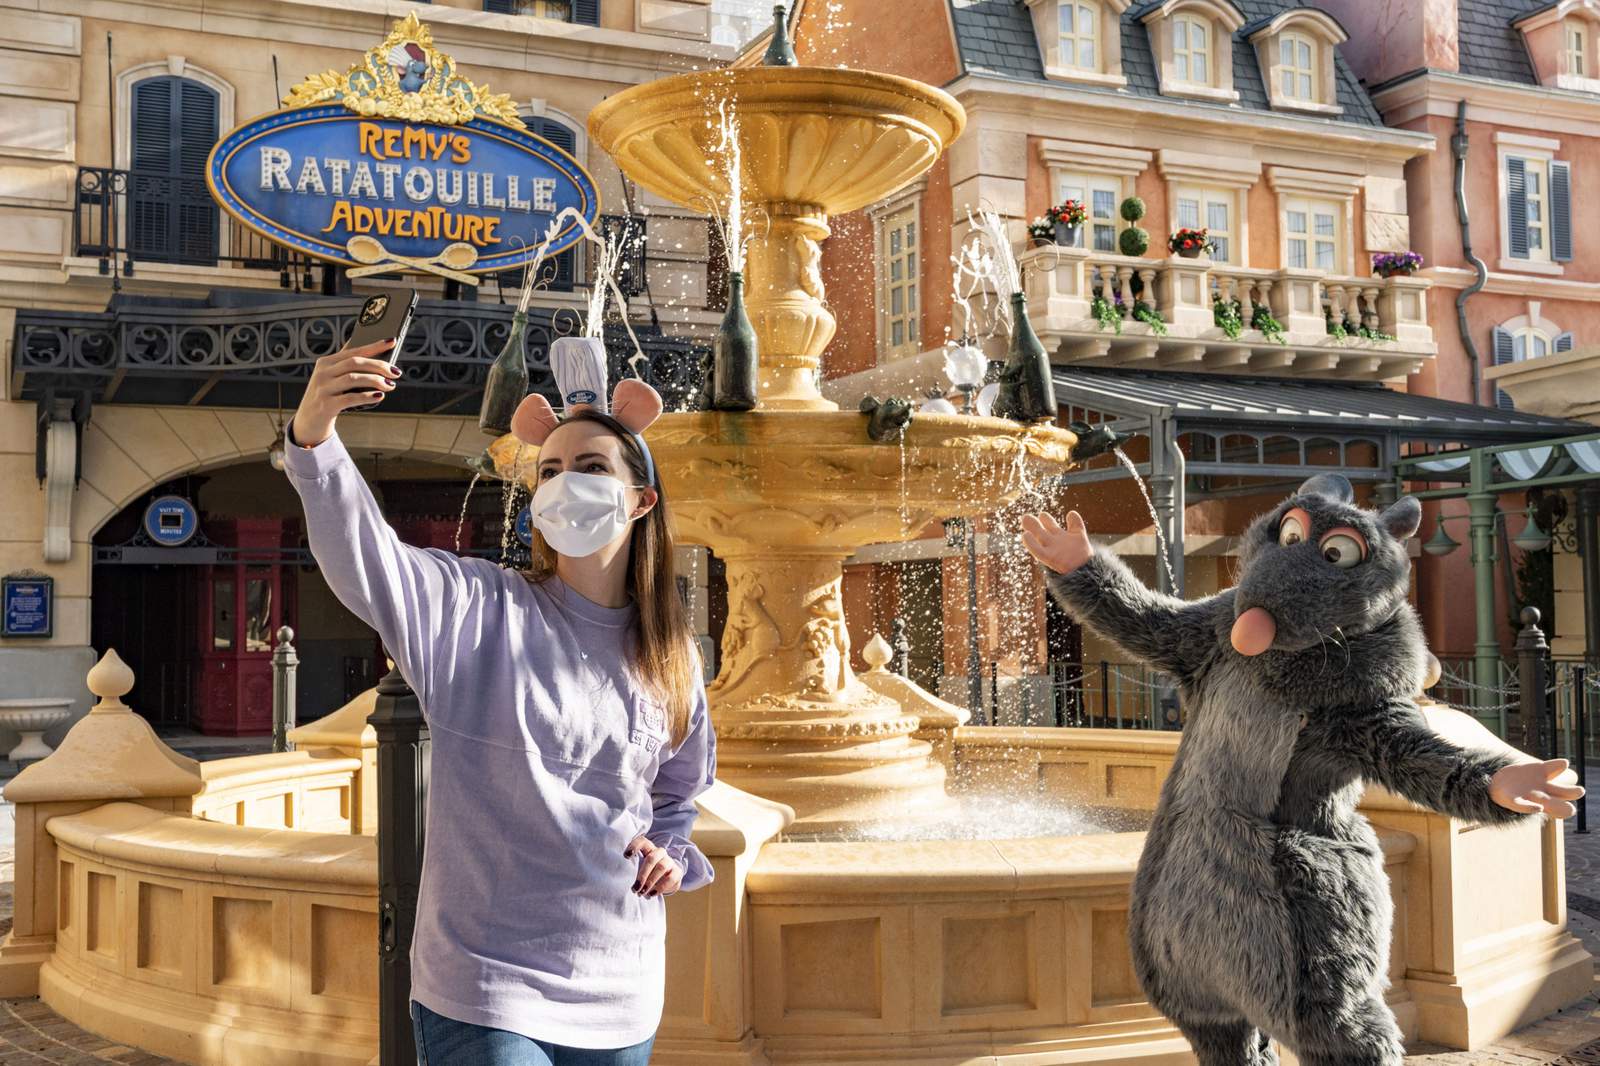 Emily Jacobsen, whose excitement for Remy’s Ratatouille Adventure led her to compose a song about Remy that sparked a social media phenomenon, received a sneak peek of the attraction, which will open in 2021 at EPCOT at Walt Disney World Resort in Lake Buena Vista, Fla., on Sunday, Dec. 27, 2020